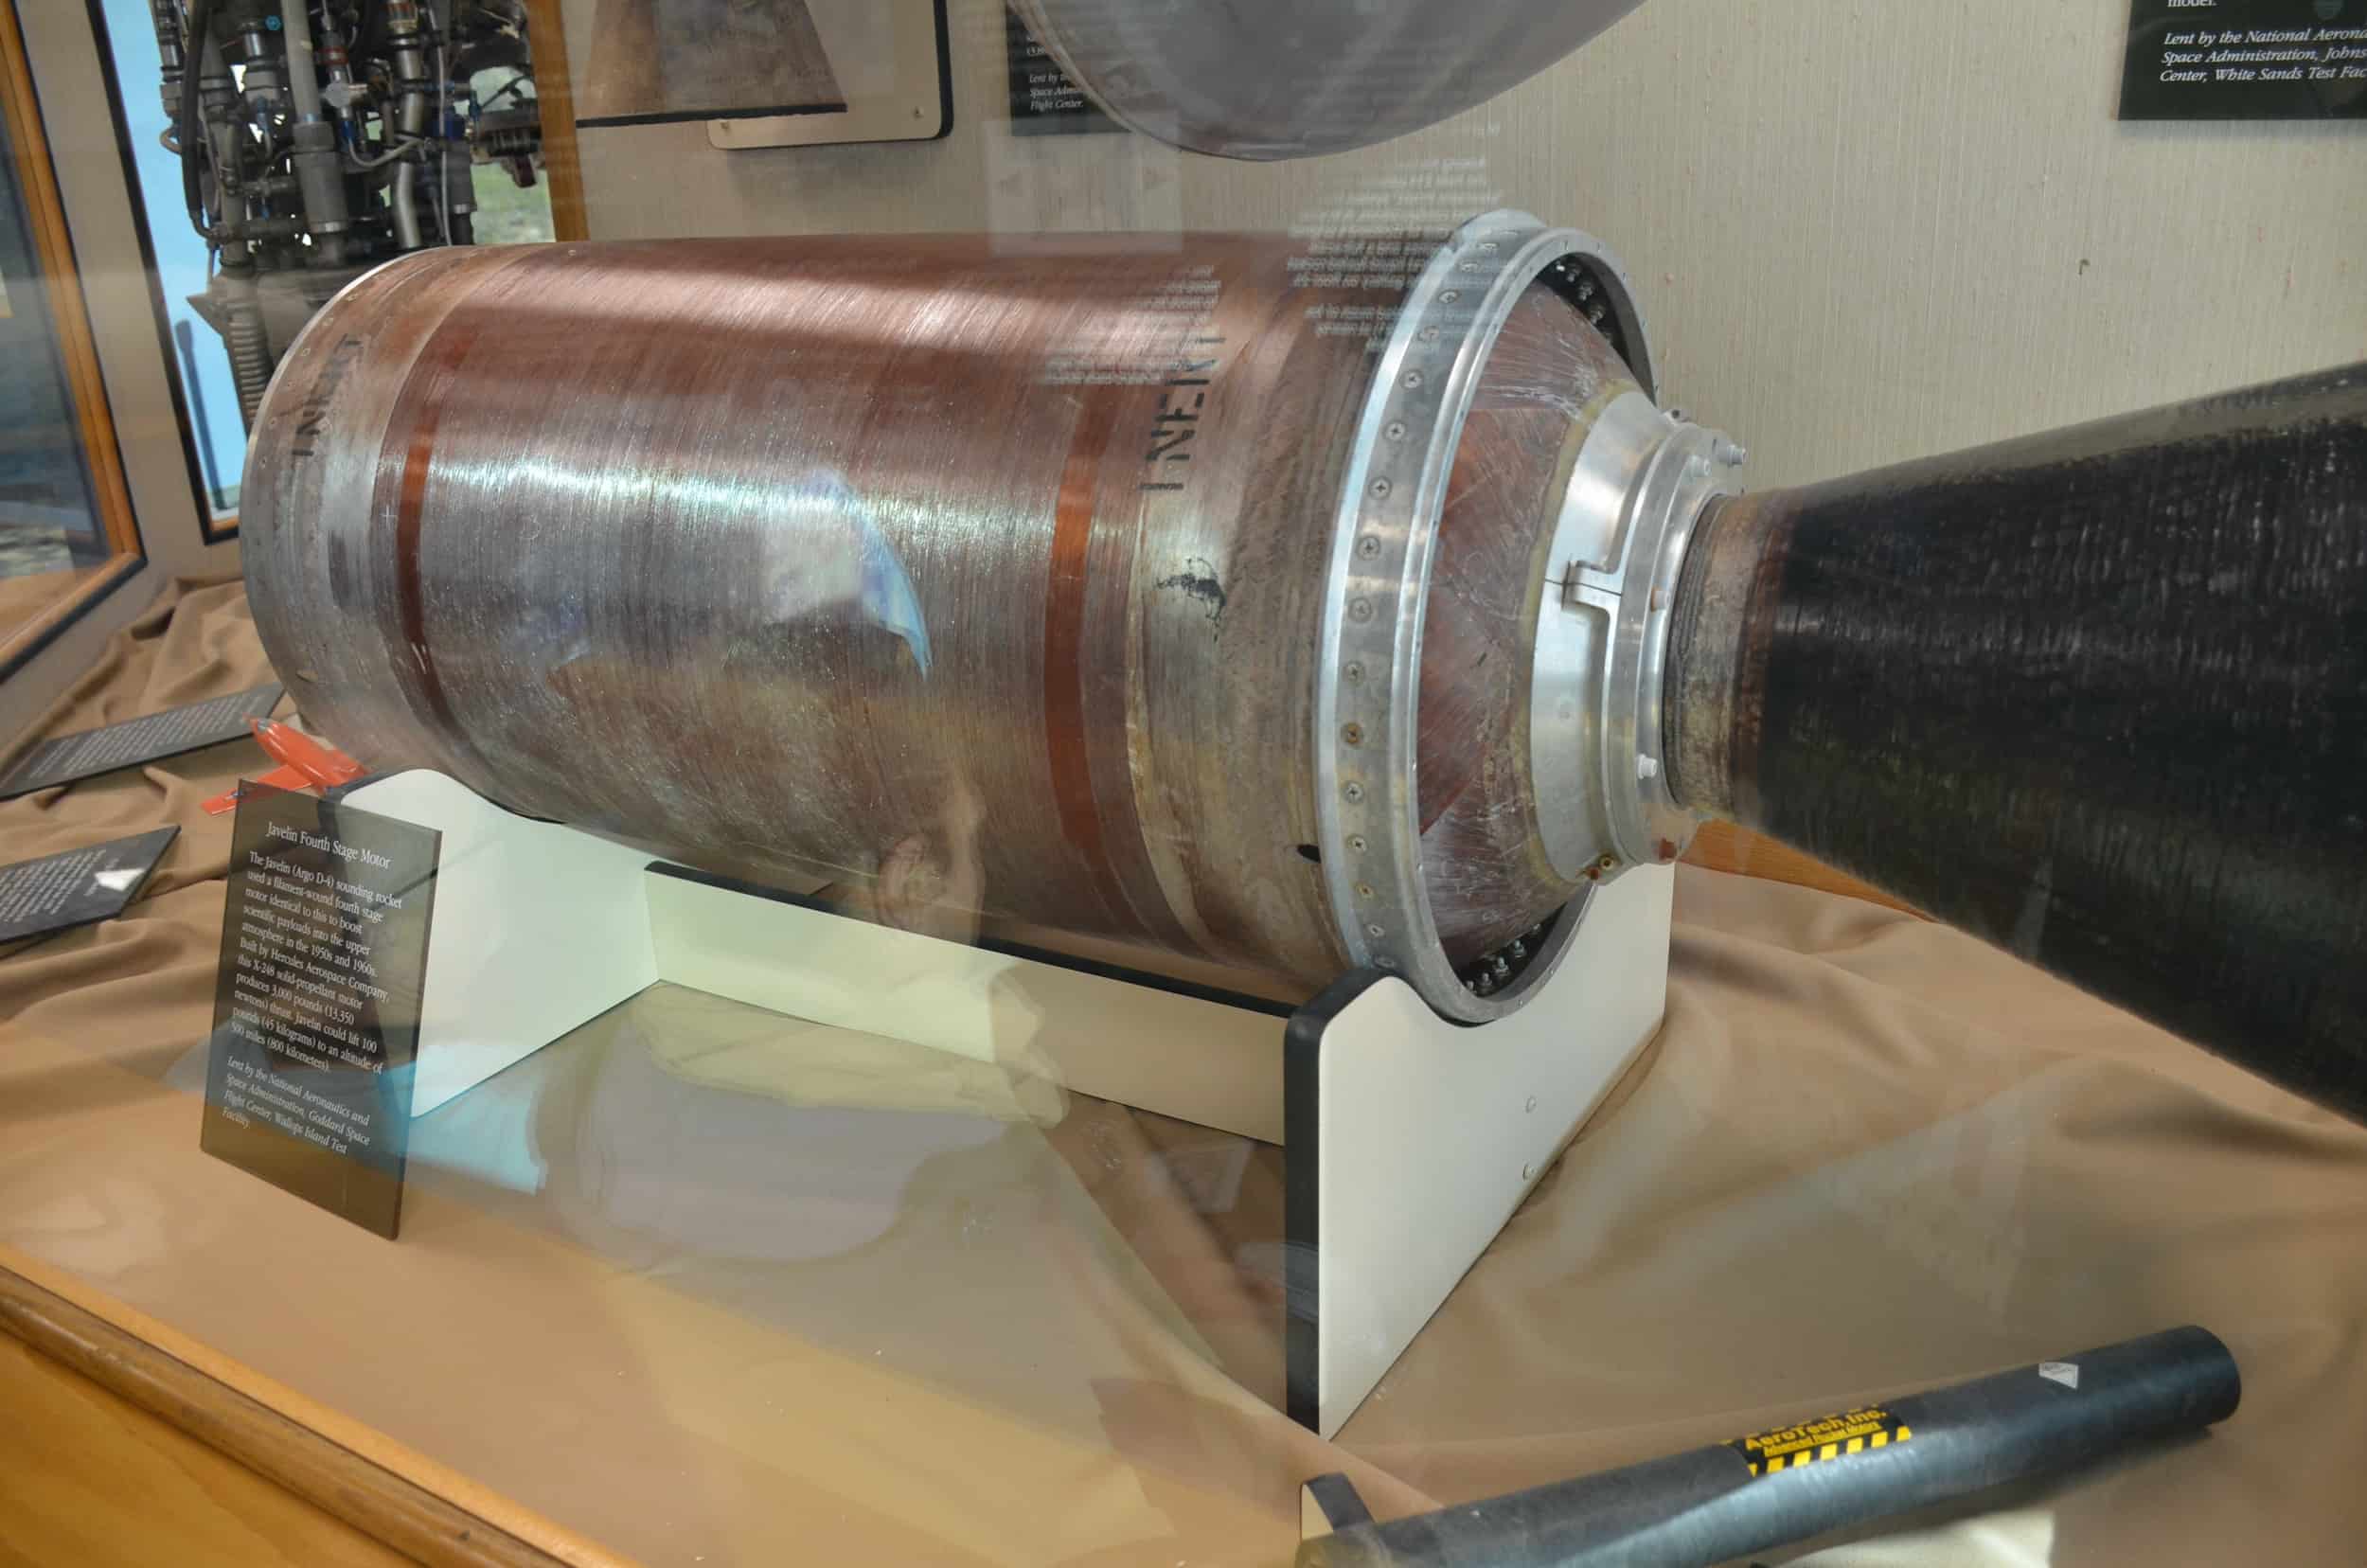 Javelin fourth stage motor at the New Mexico Museum of Space History in Alamogordo, New Mexico